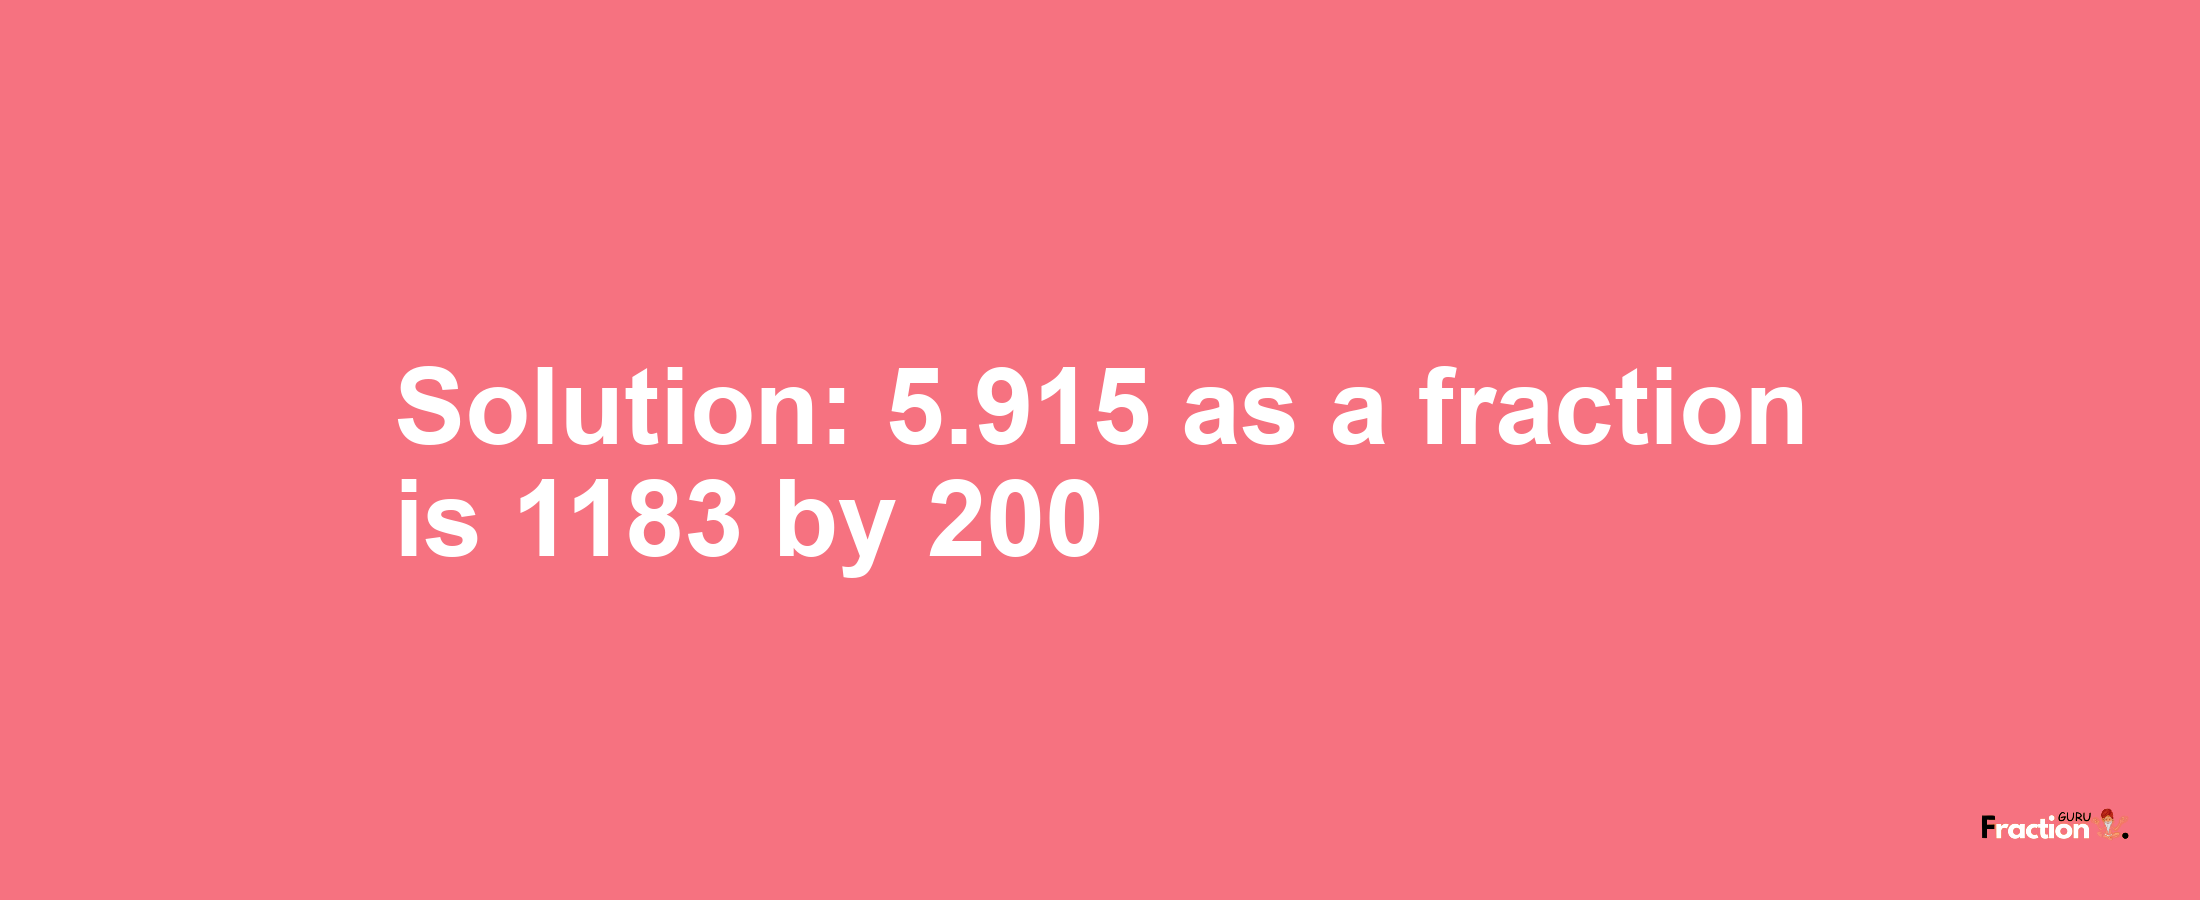 Solution:5.915 as a fraction is 1183/200